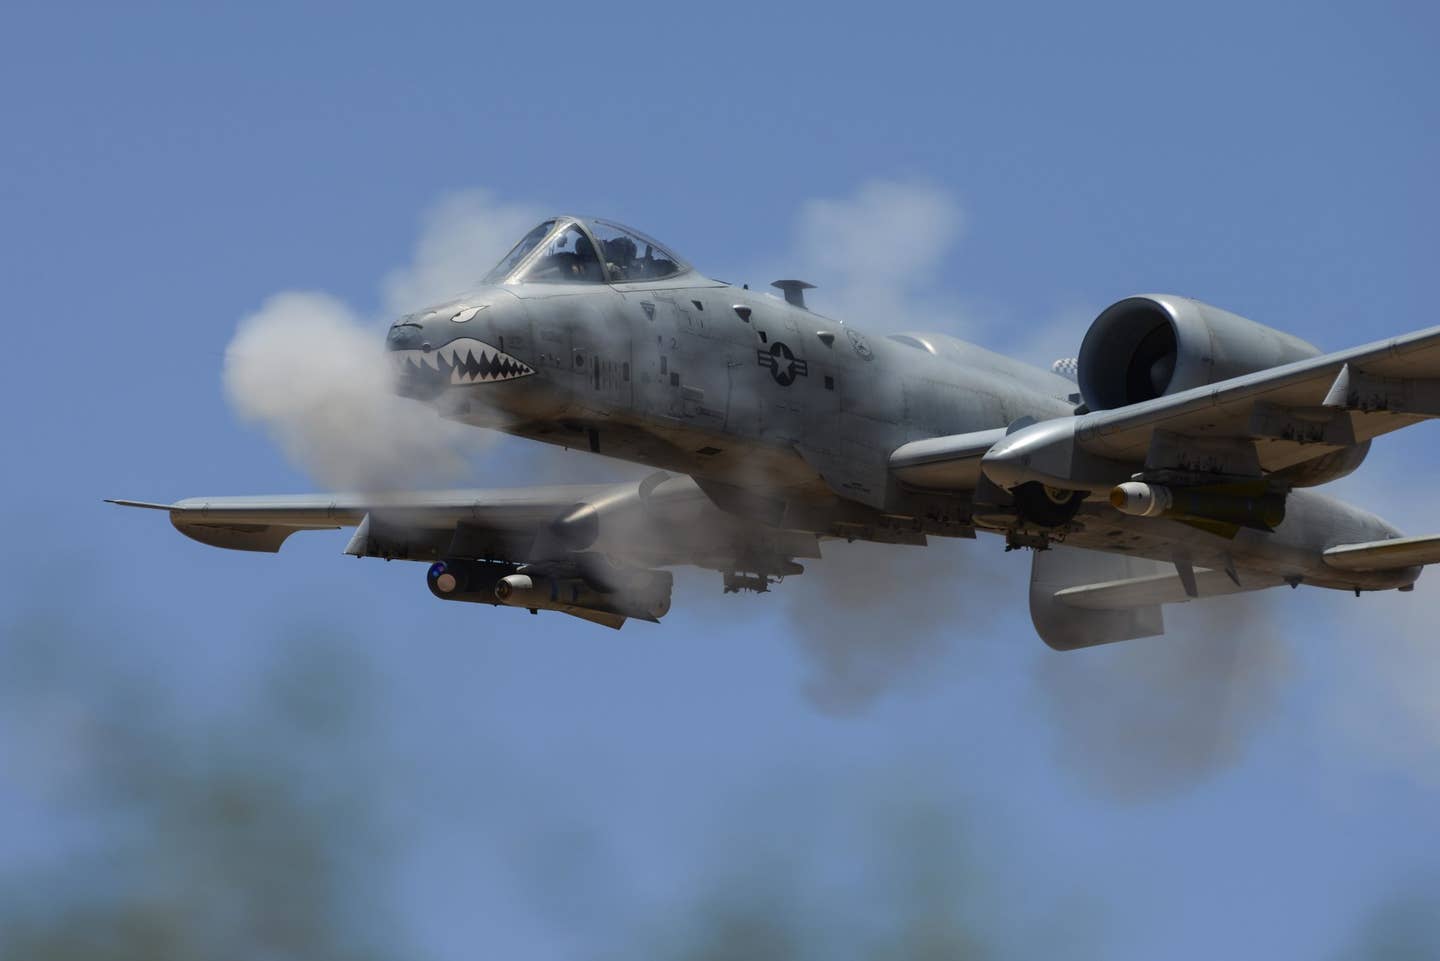 Two A-10 Thunderbolts will also take part in the flyover. (USAF photo)